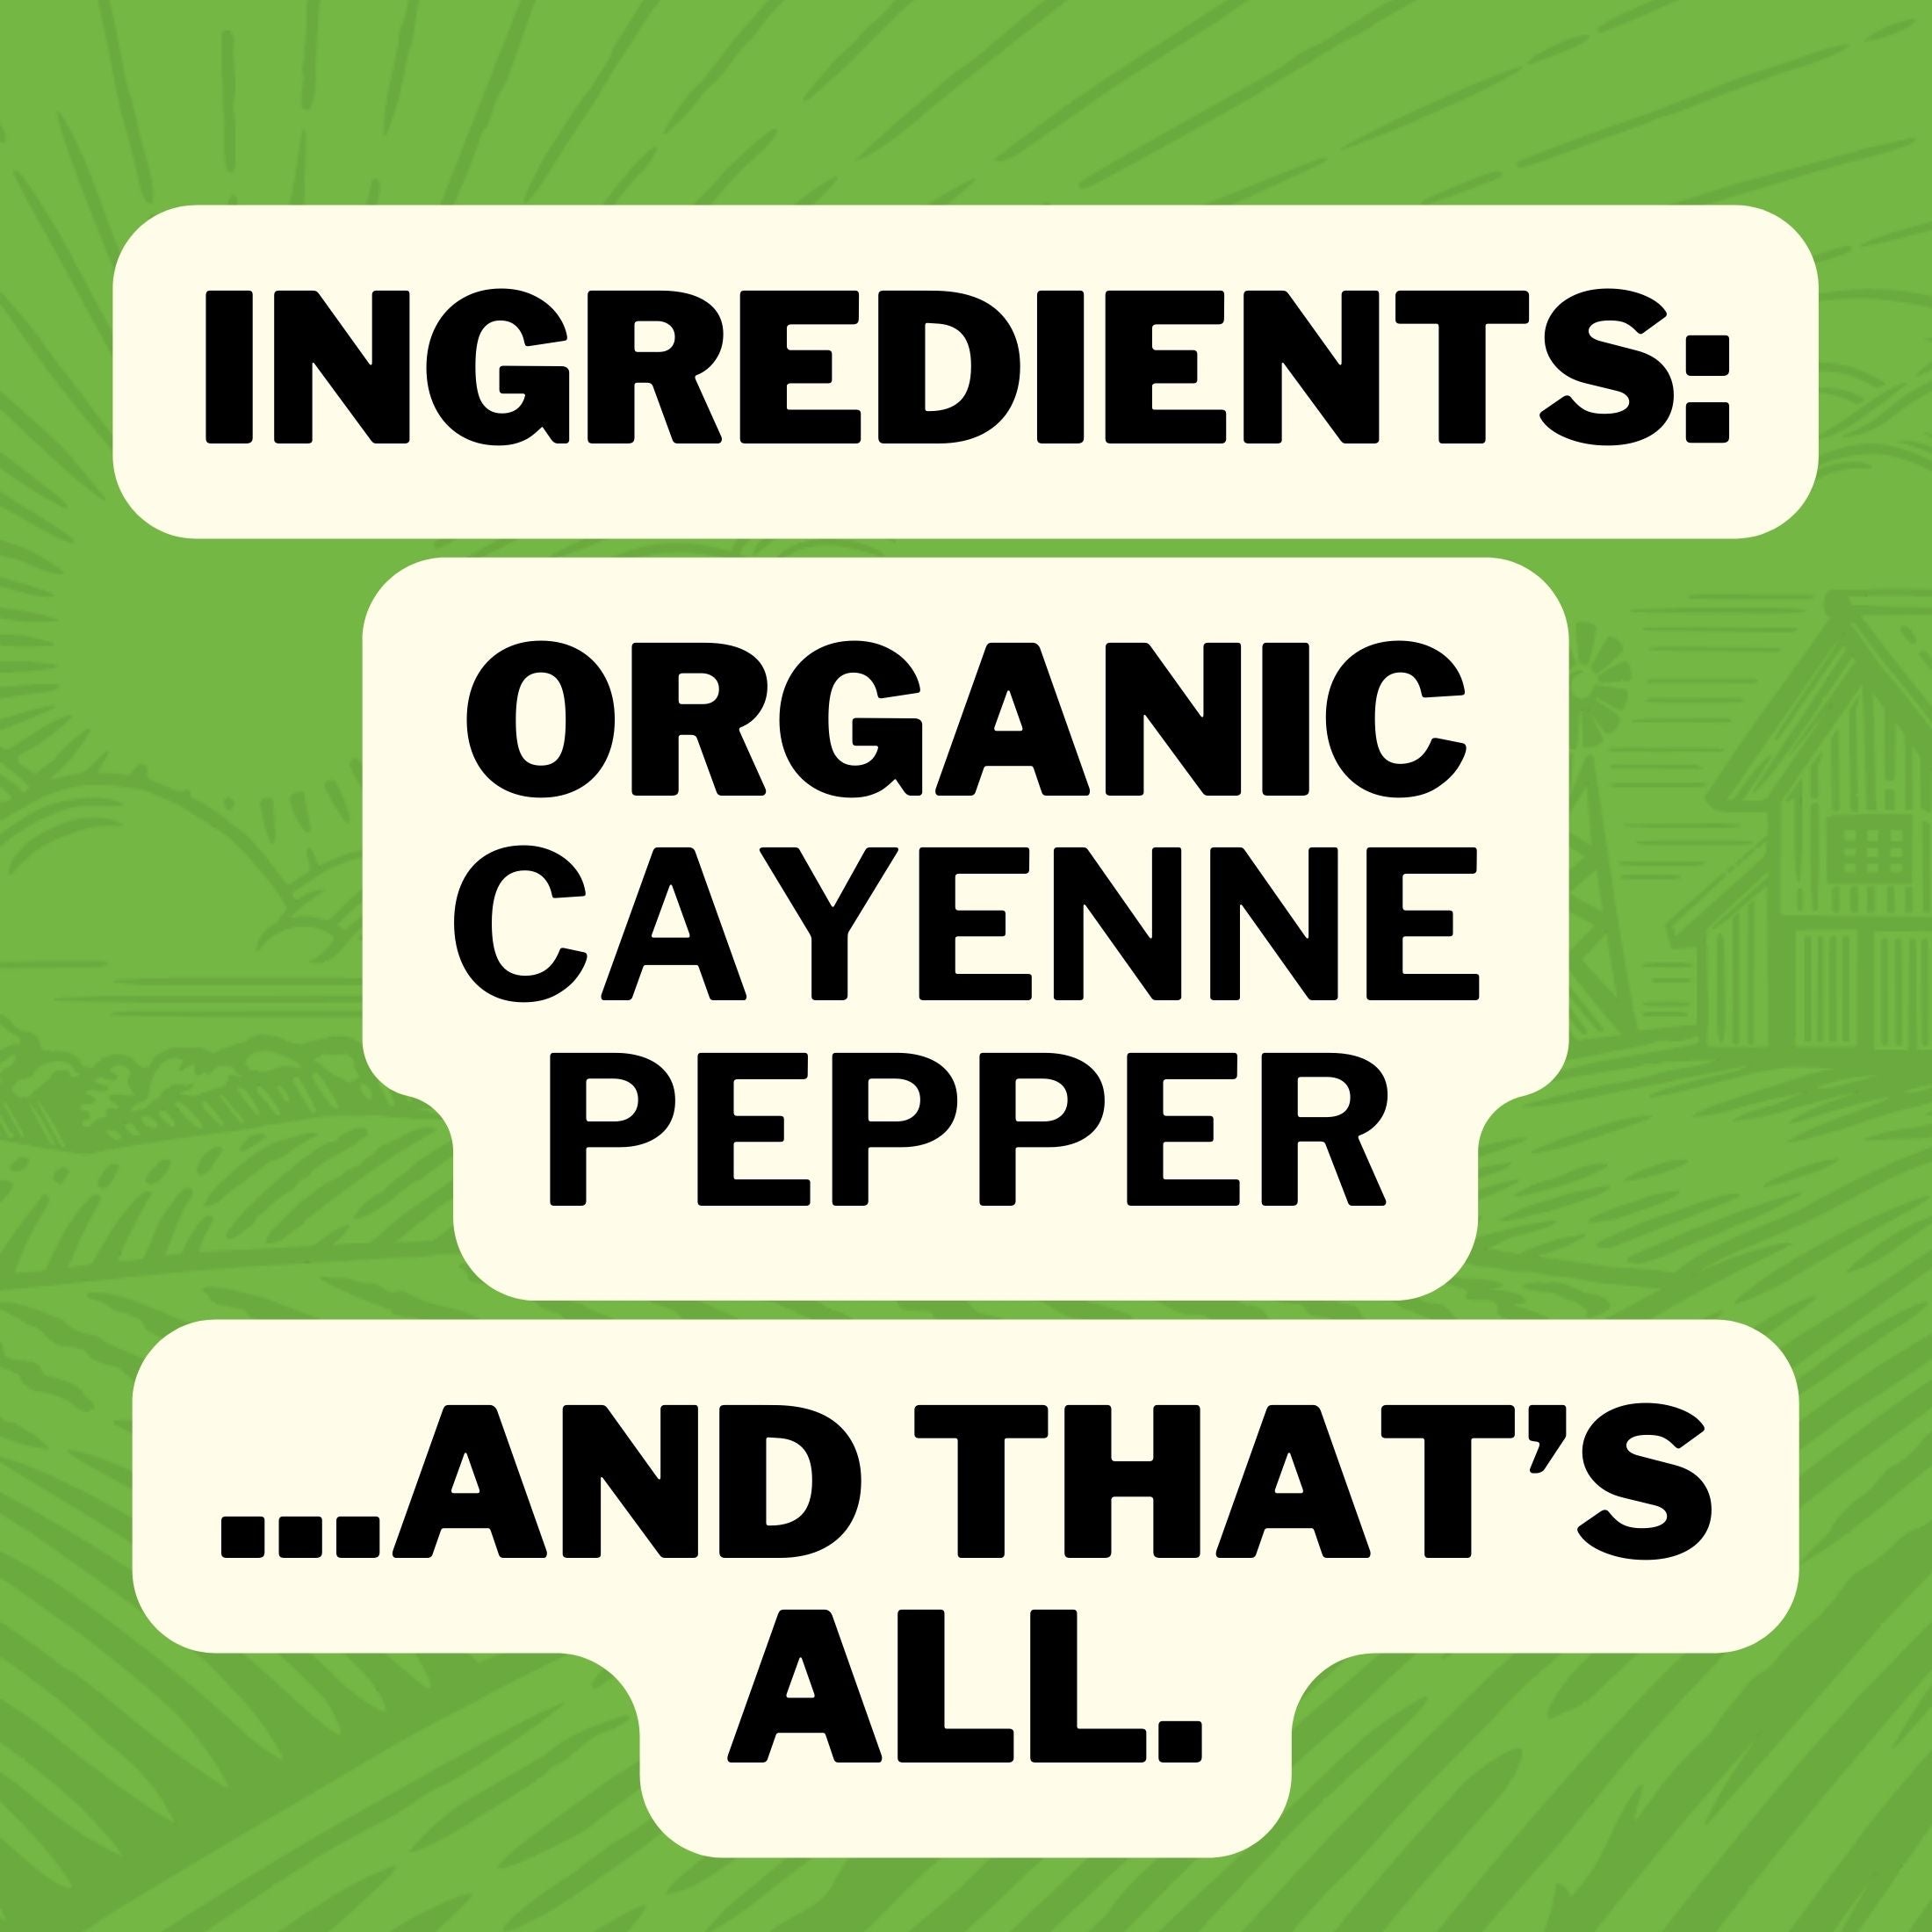 Ingredients: Organic Cayenne Pepper... and that's all.